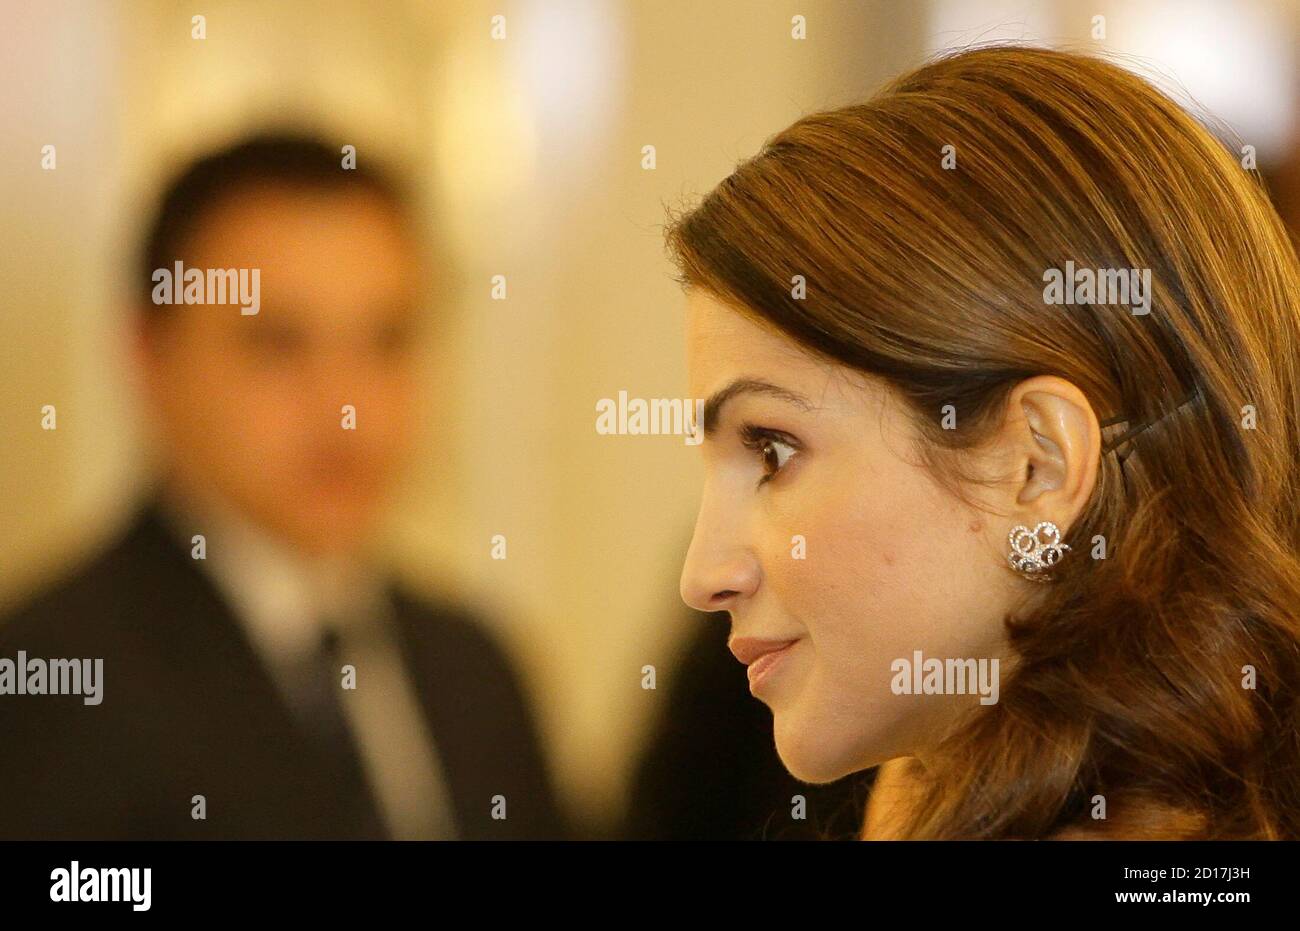 Queen Rania of Jordan leaves after a visit of the Imperial Silver Collection (Silberkammer) in Vienna's Hofburg palace April 9, 2008.  REUTERS/Herbert Neubauer  (AUSTRIA) Stock Photo